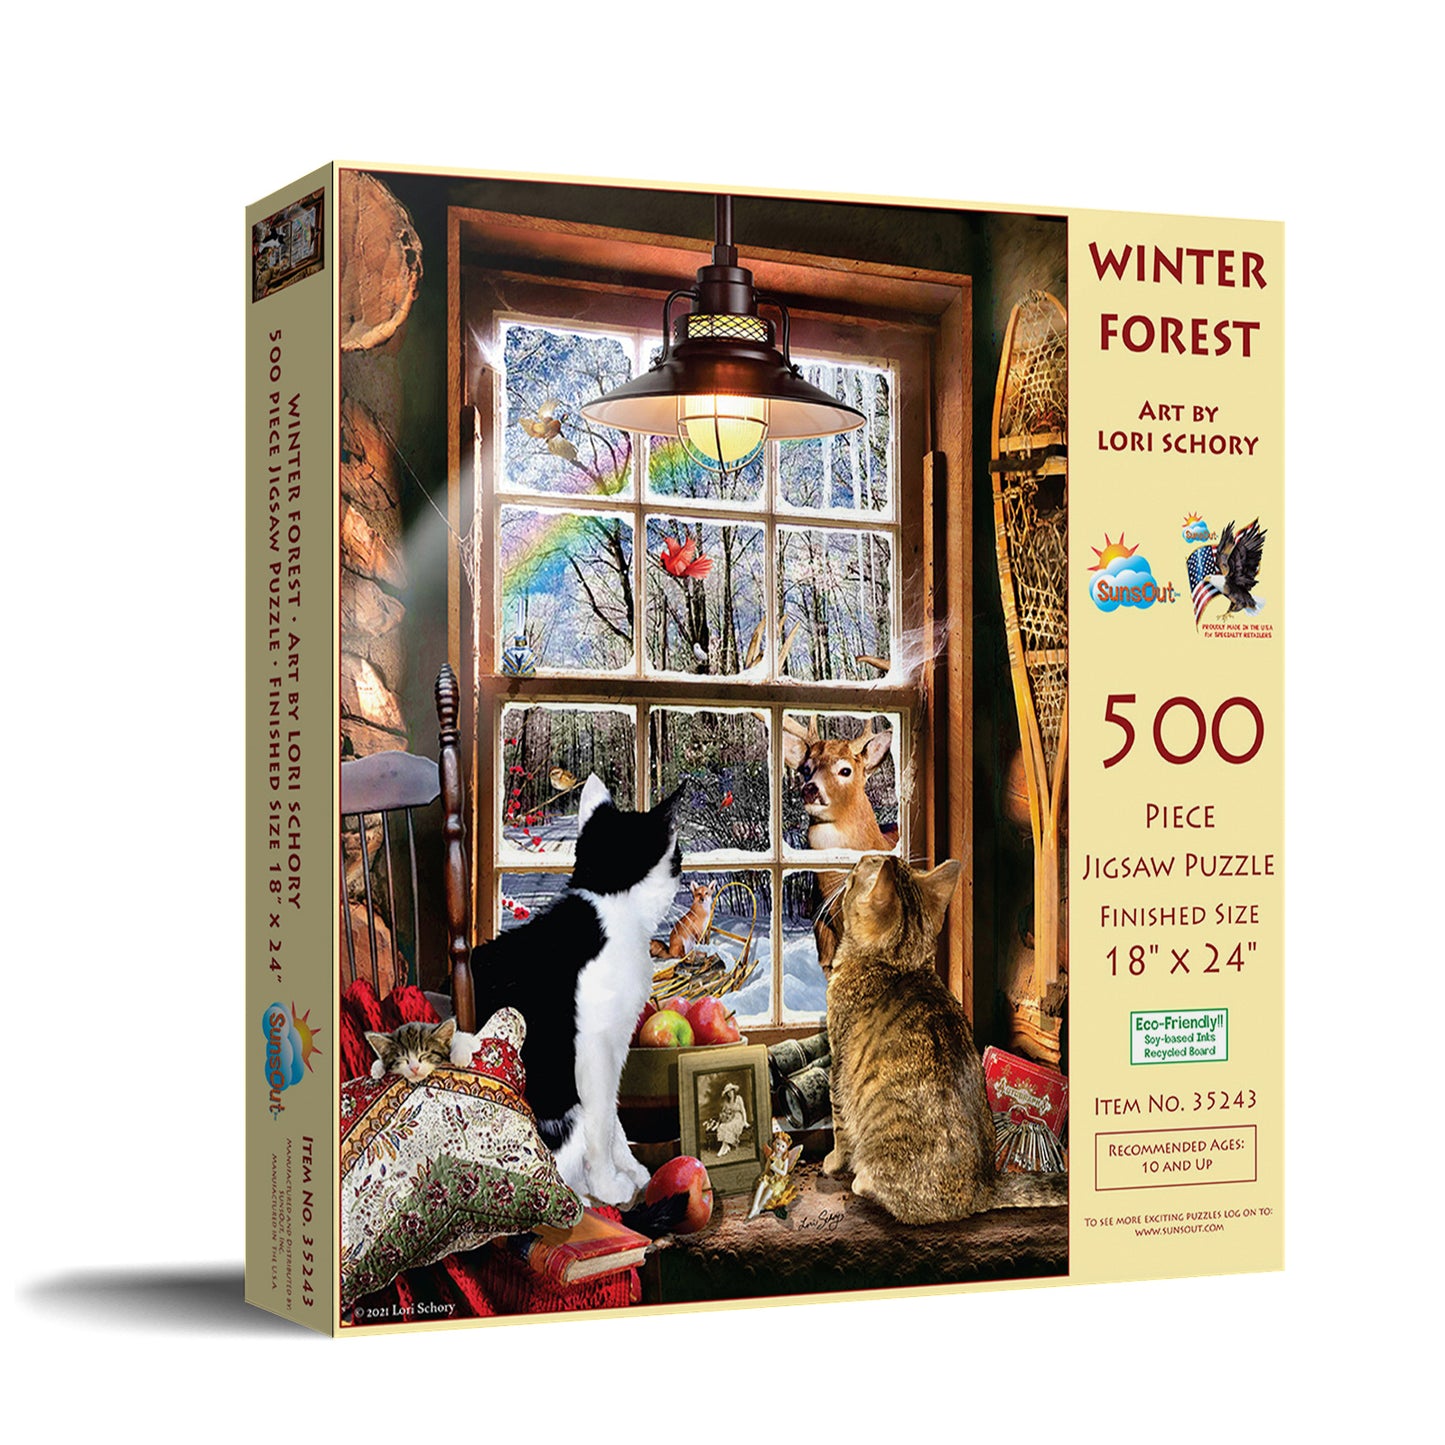 Winter Forest - 500 Piece Jigsaw Puzzle